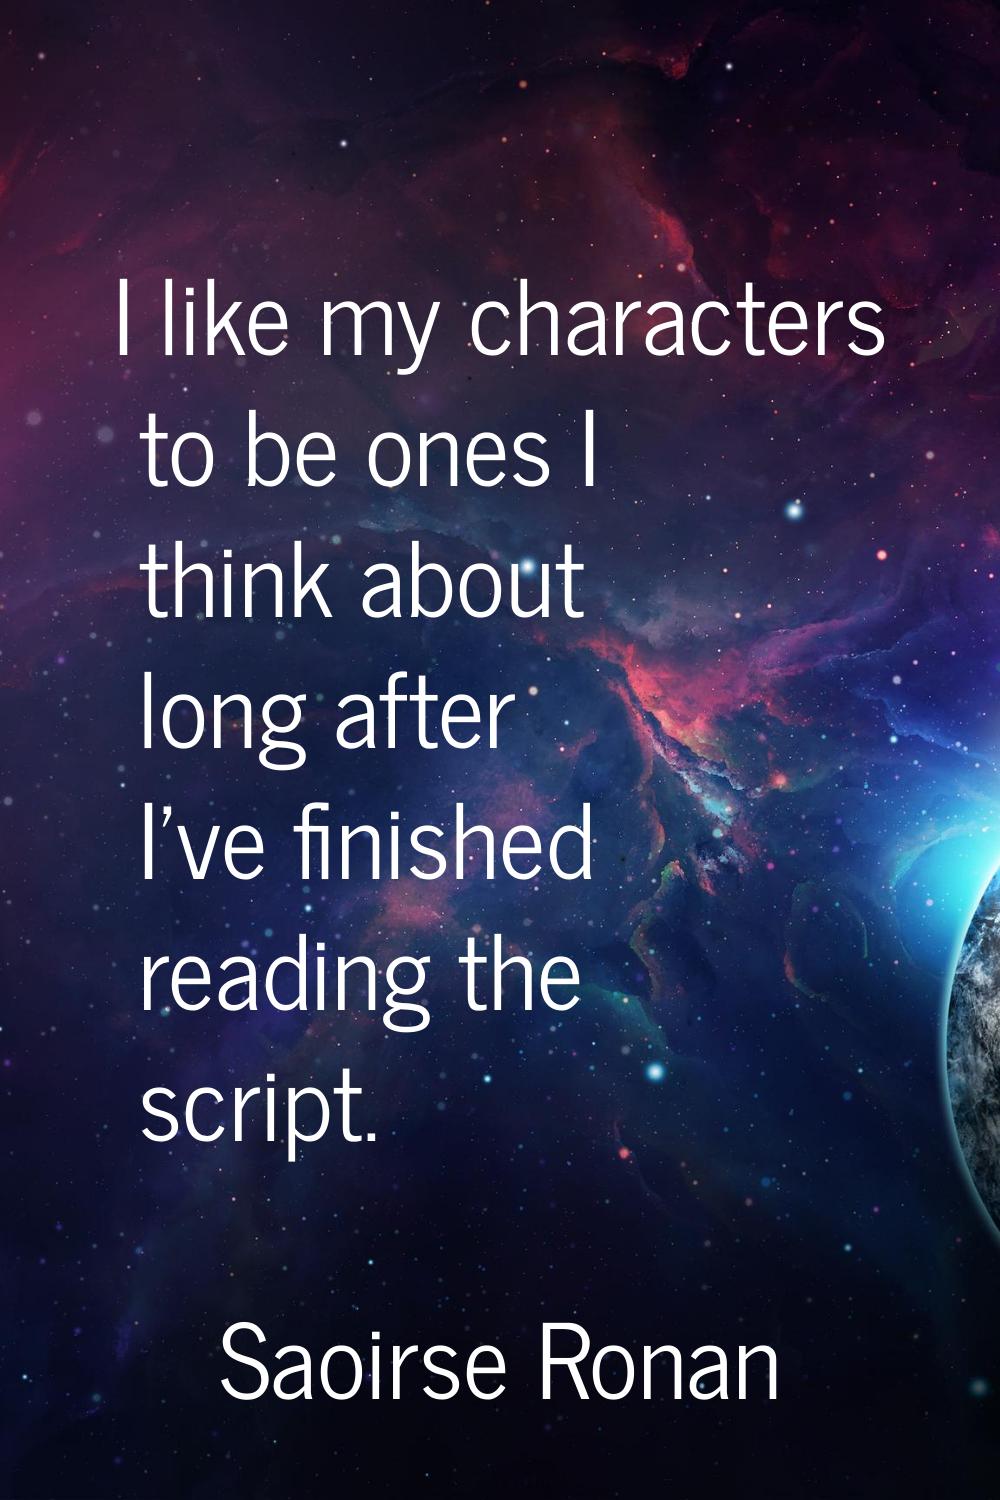 I like my characters to be ones I think about long after I've finished reading the script.